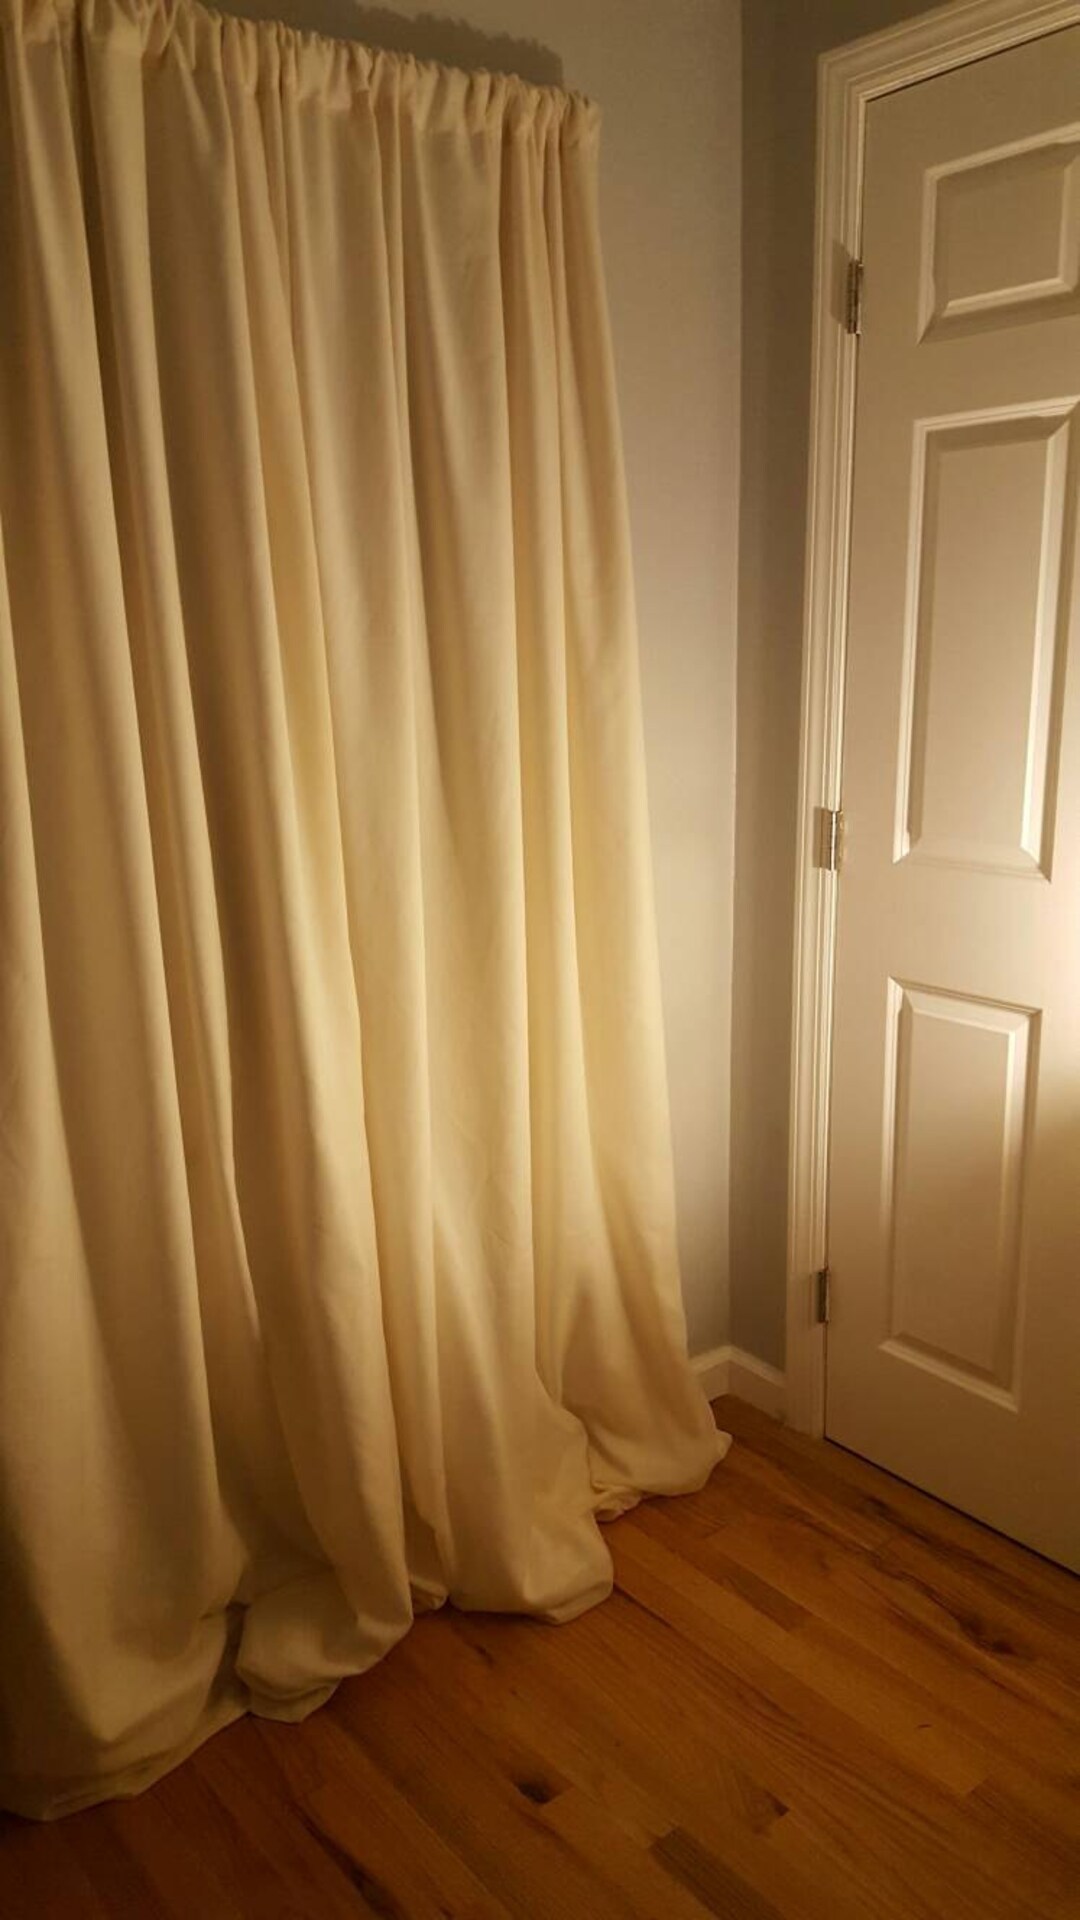 One Chiffon Curtain Panel With Cotton Lining. Lined Chiffon Curtains ...